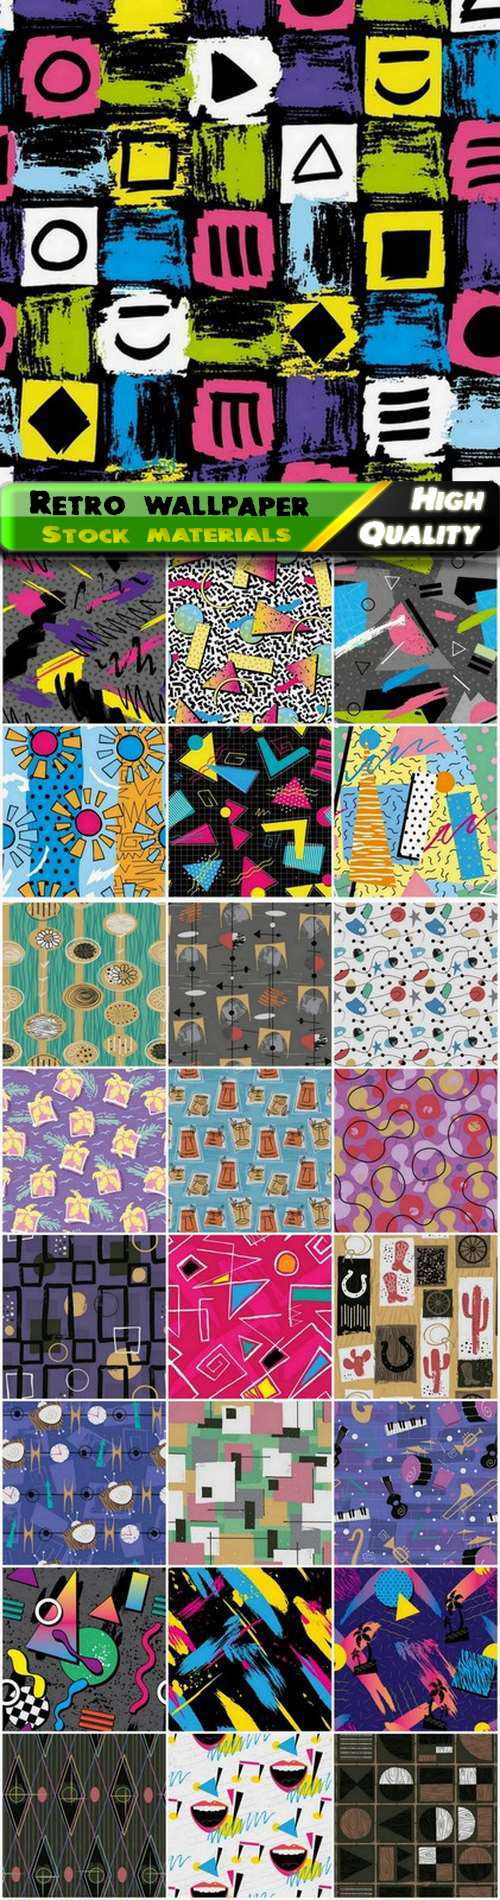 Retro style seamless pattern for wallpaper or textile design - 25 Eps